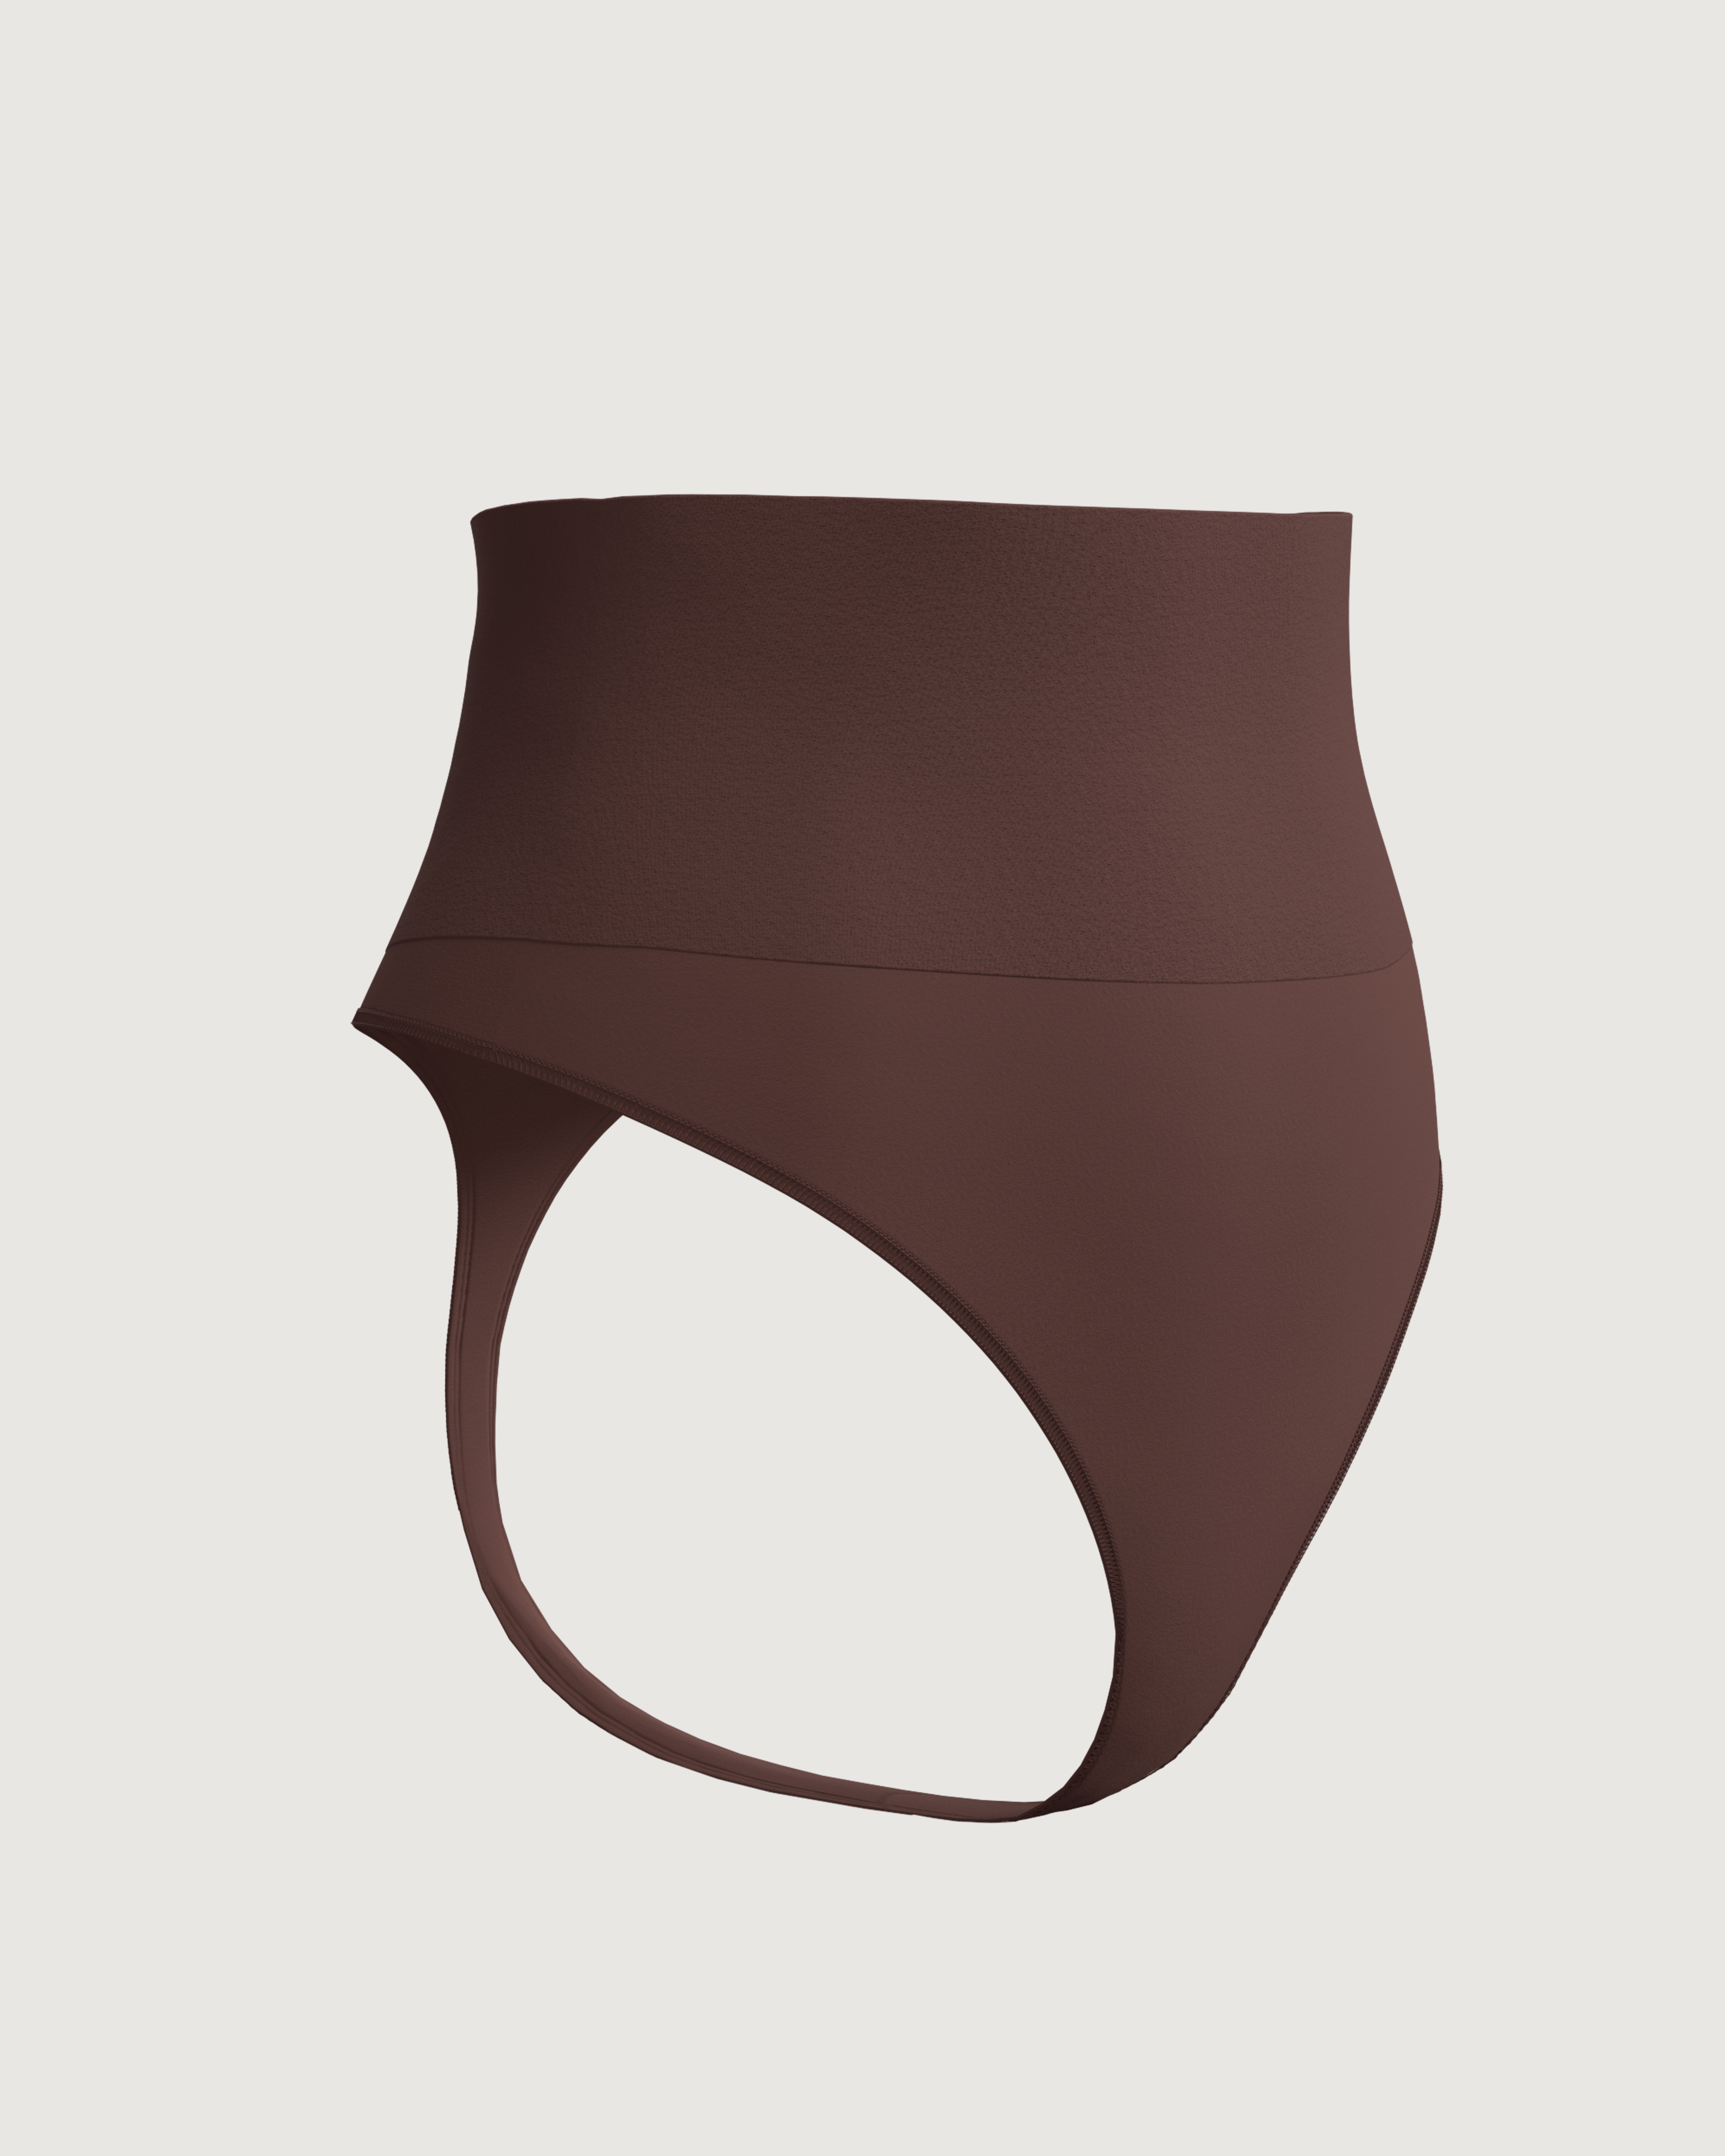 SKIMS Core Control thong - Oxide